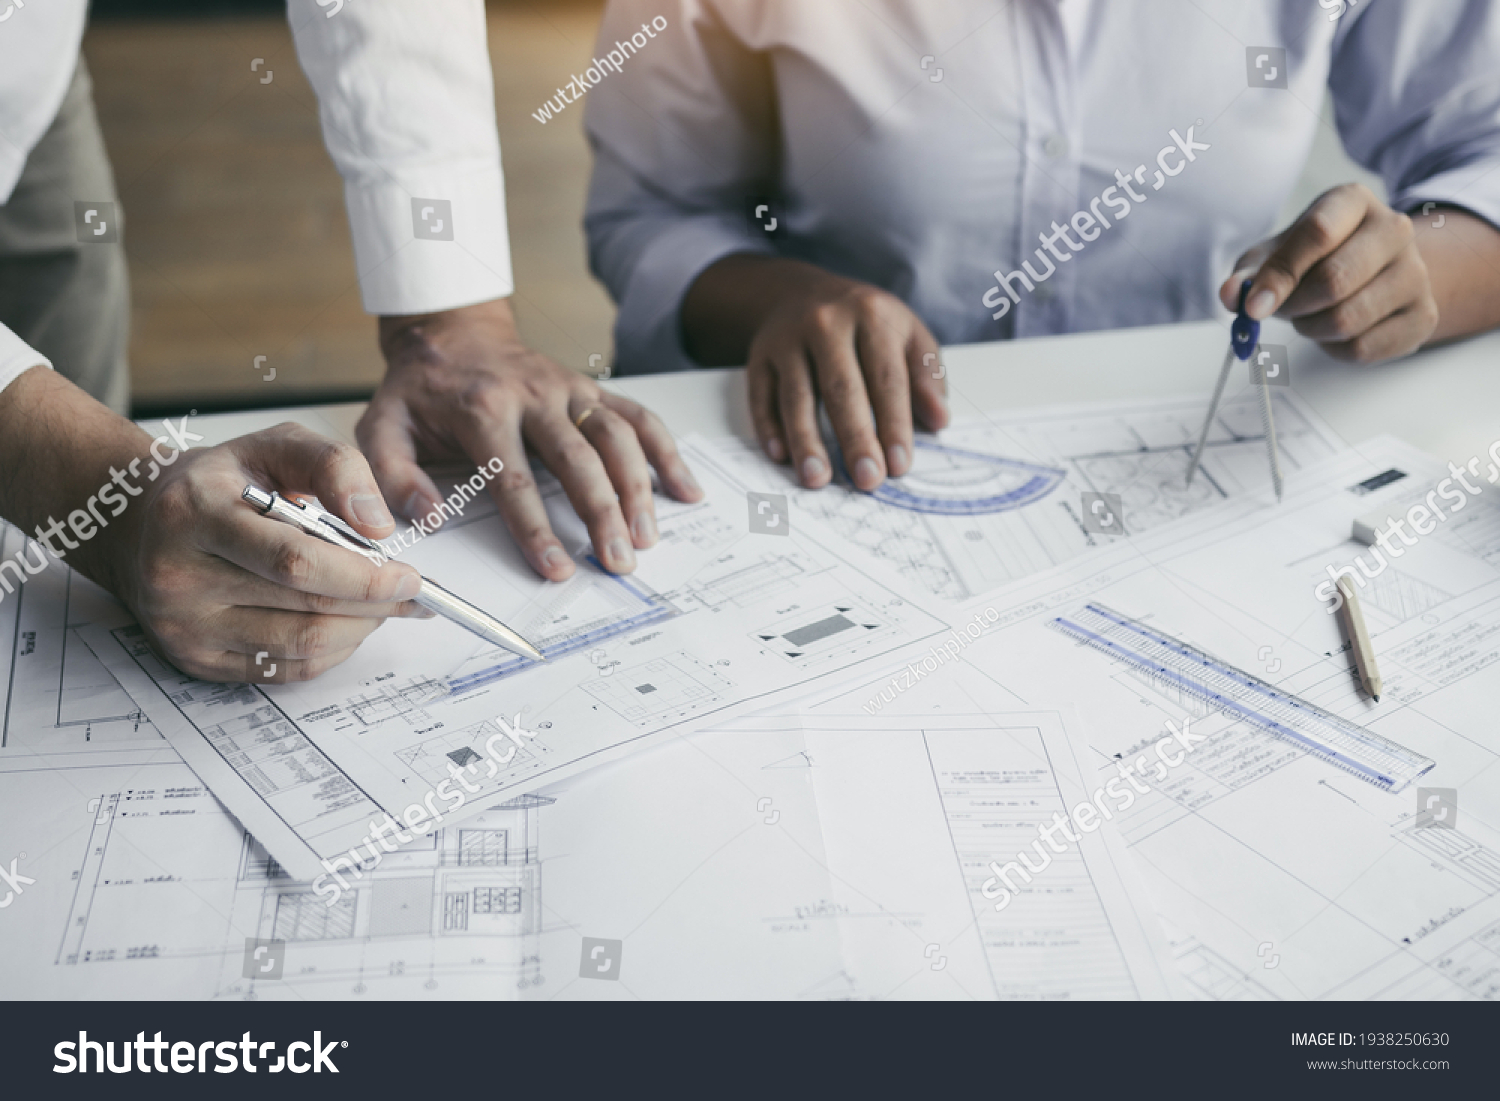 The partnership engineering man or co-workers working on a project and discussing together with looking at blueprint paperwork. #1938250630